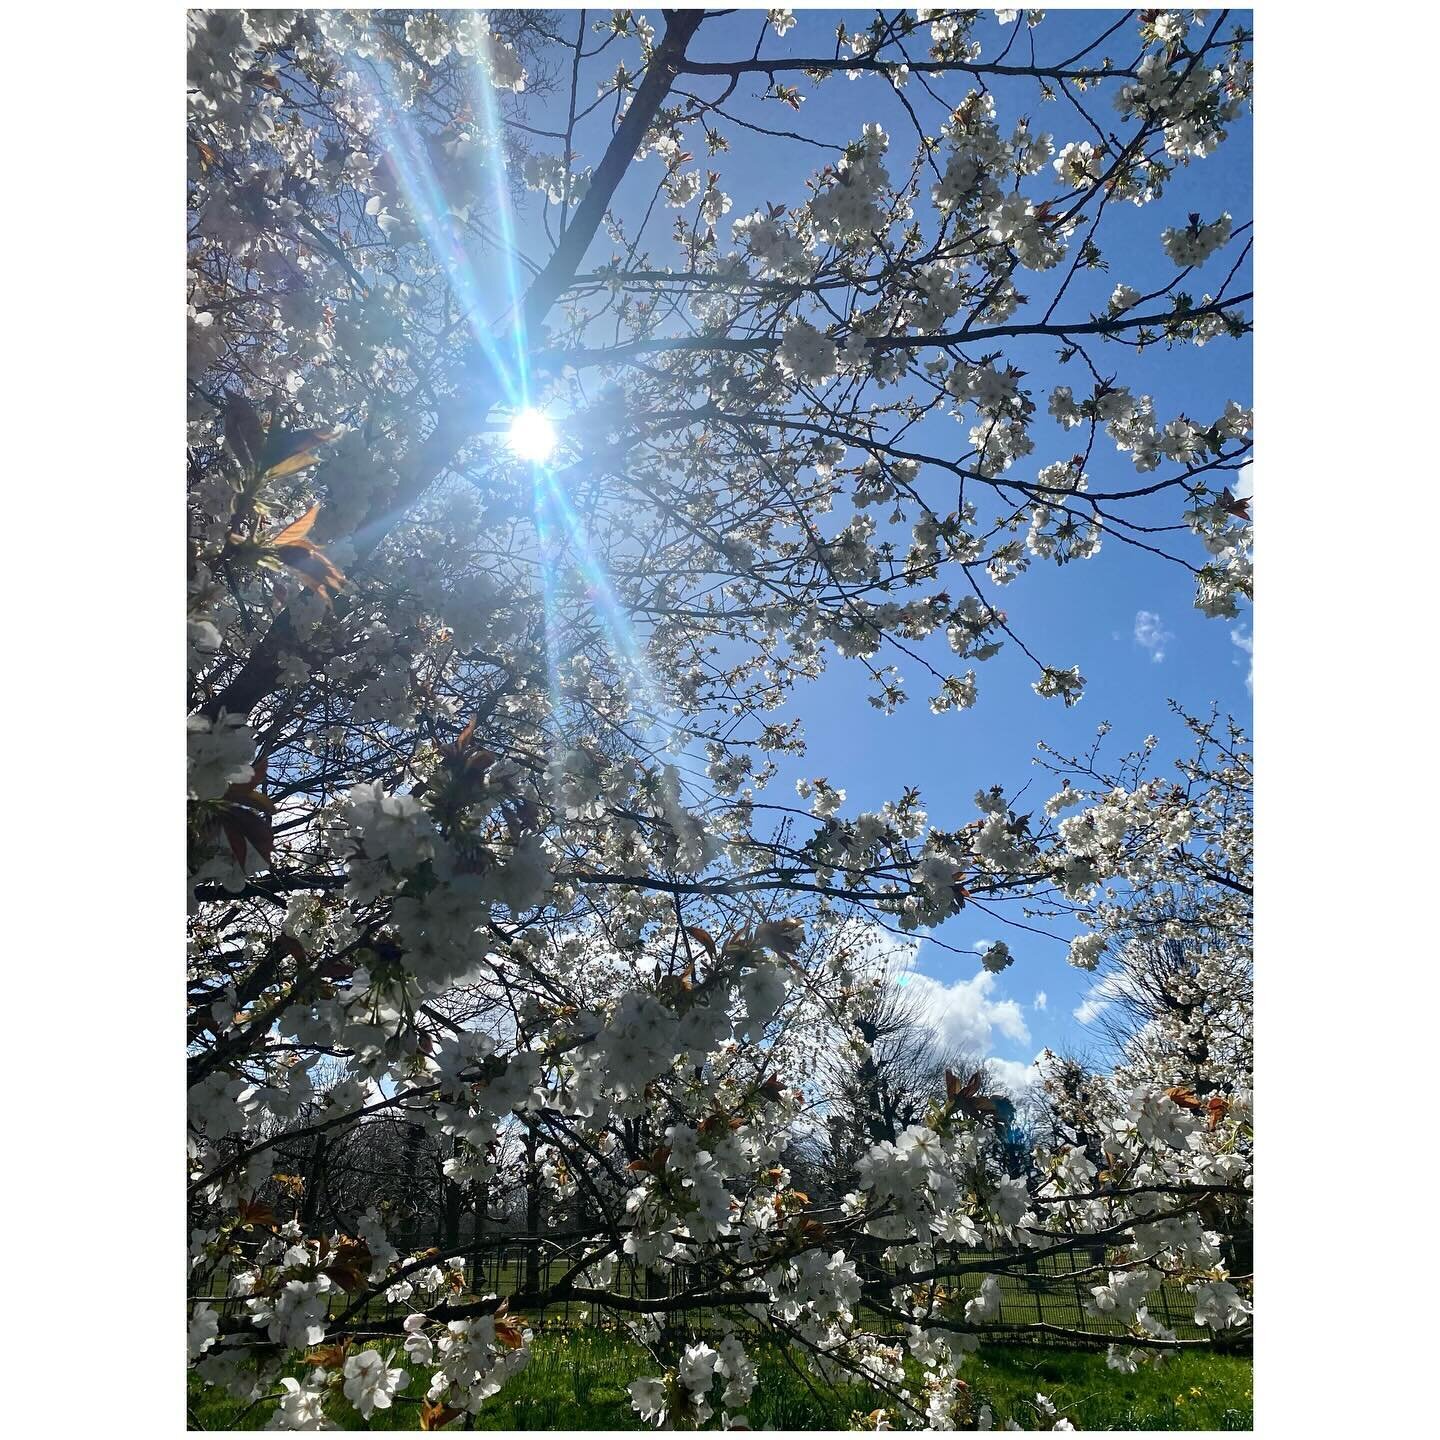 A springtime appreciation post for blossoms, camellias, blue skies and fluffy clouds 🤍🩵☁️🌸

First 7 pics from @ntdunhammassey the rest at @bhambotanicalgardens
.
.
.
#blossomwatch #springtime #outandabout #blueskies #thenationaltrust #beautifulgar